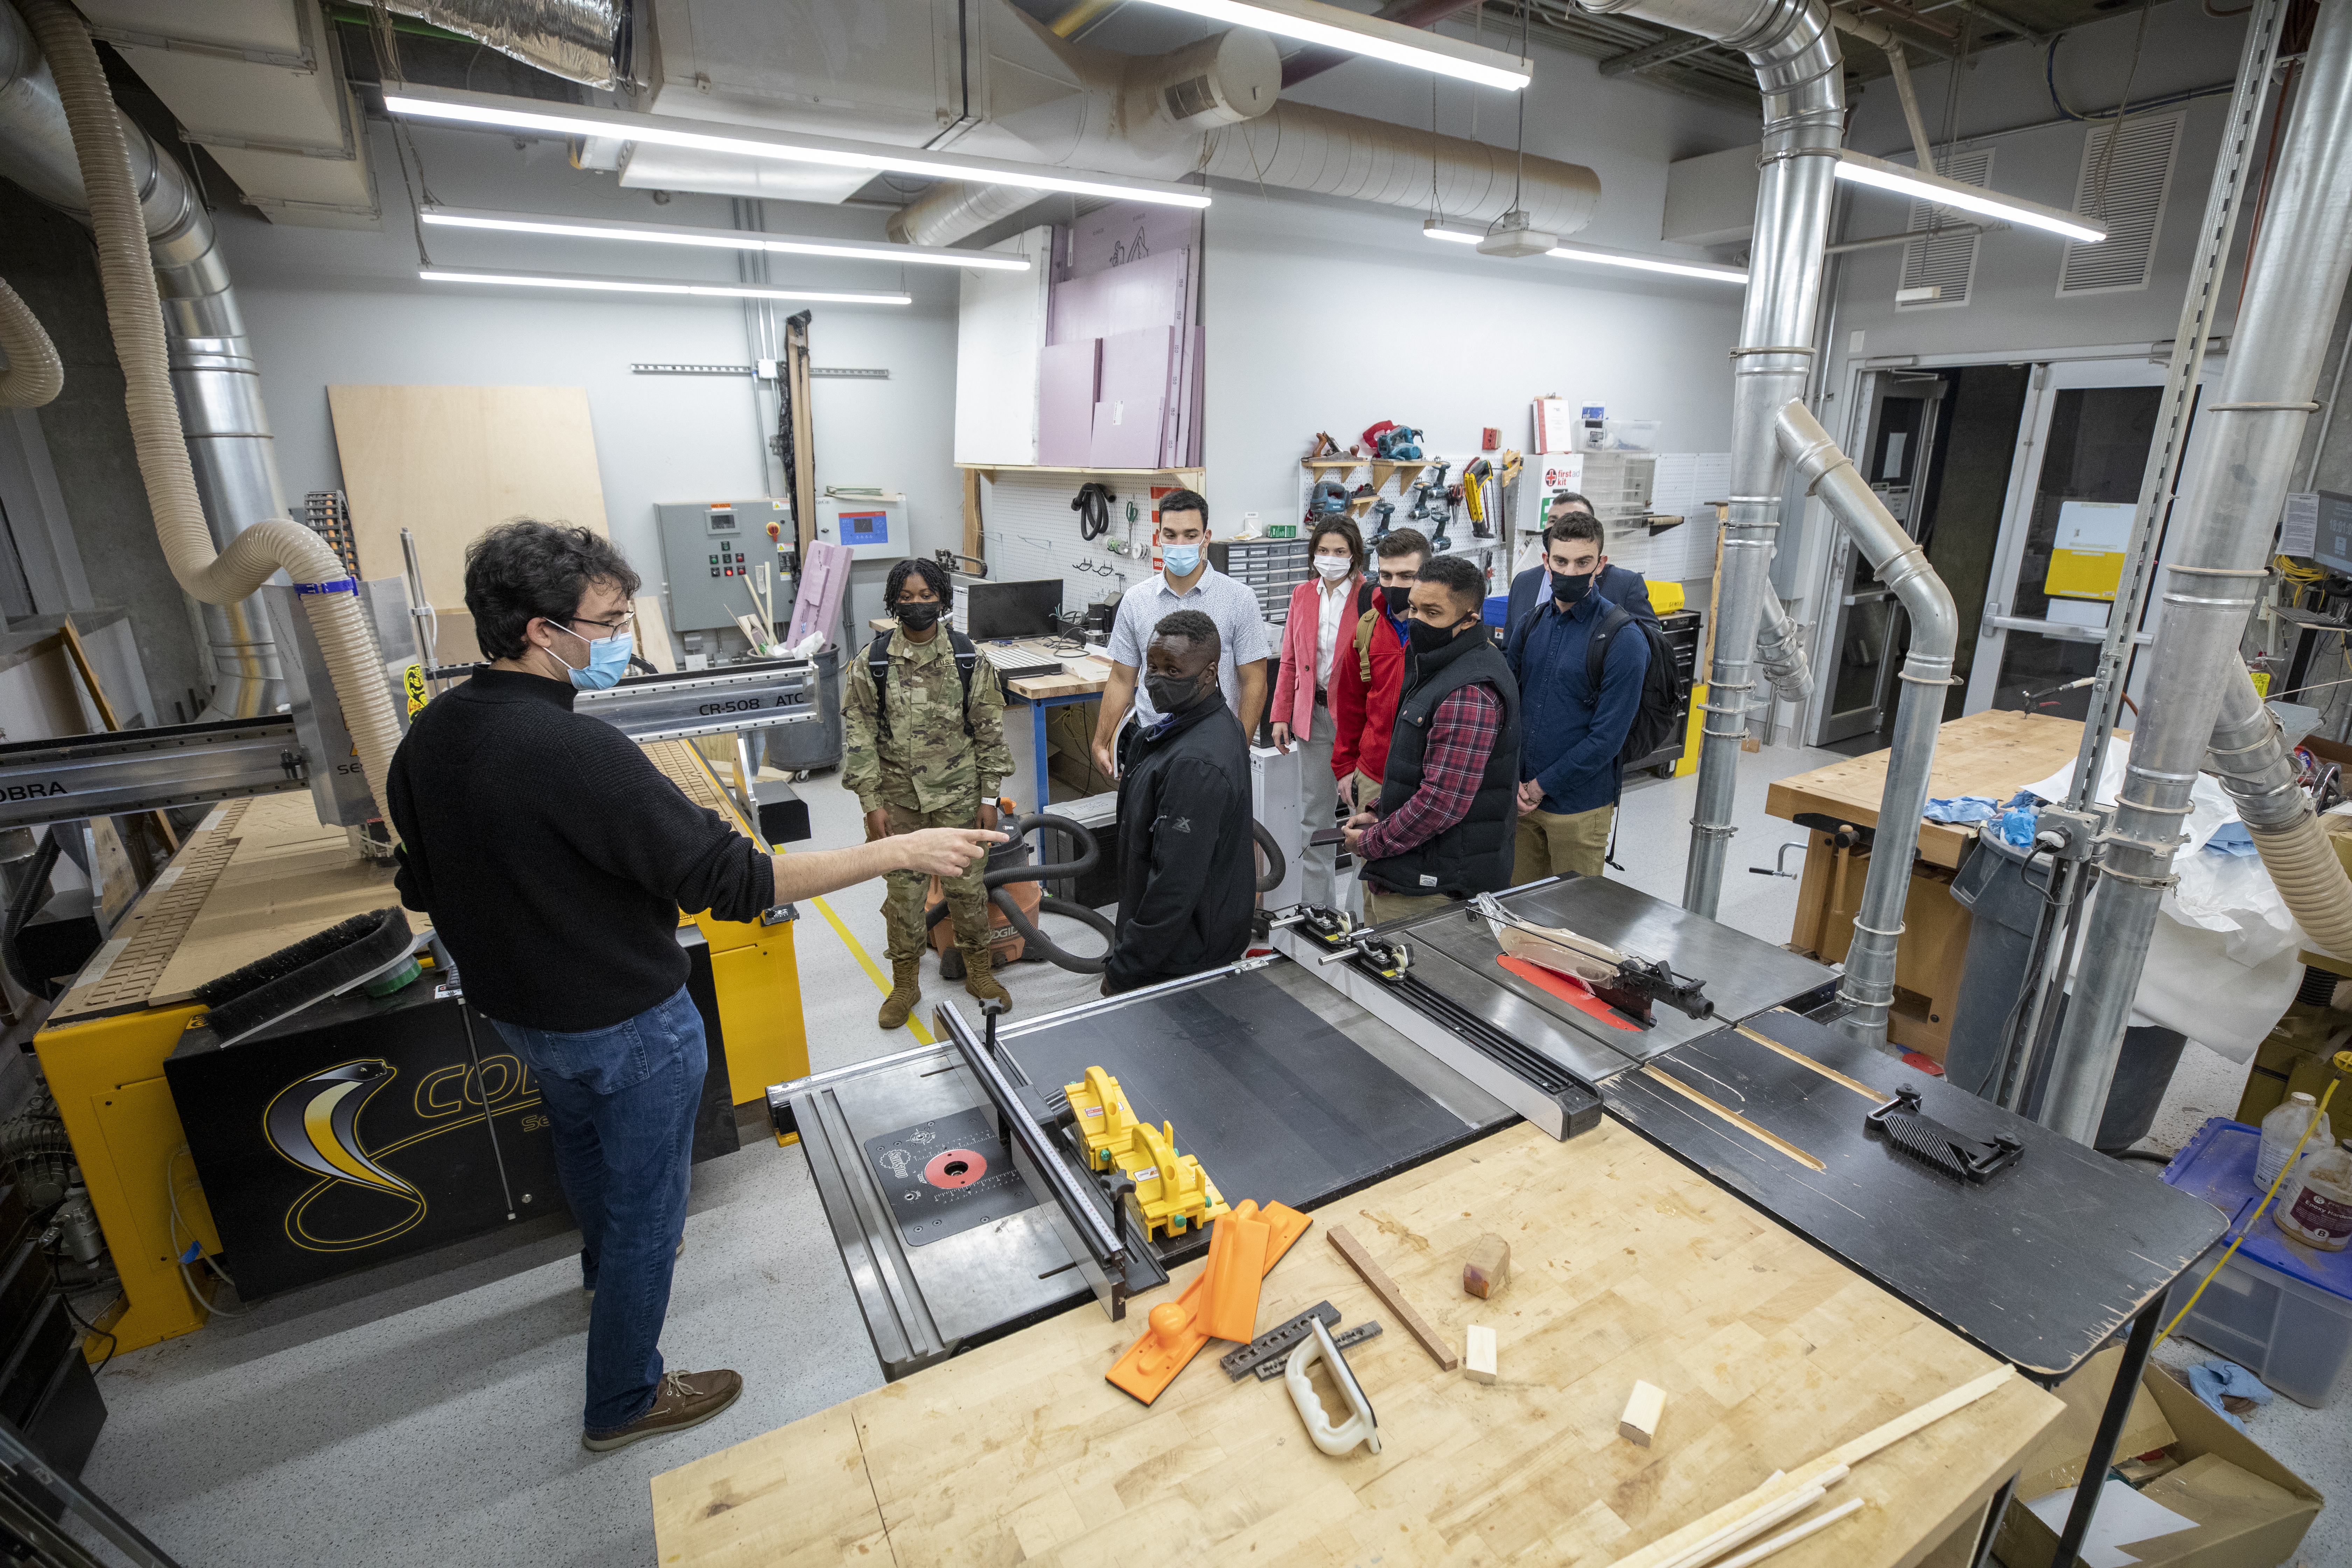 Participants at the Marne Innovation Workshop in a makerspace. (Photo Credit: Sean McNeil)